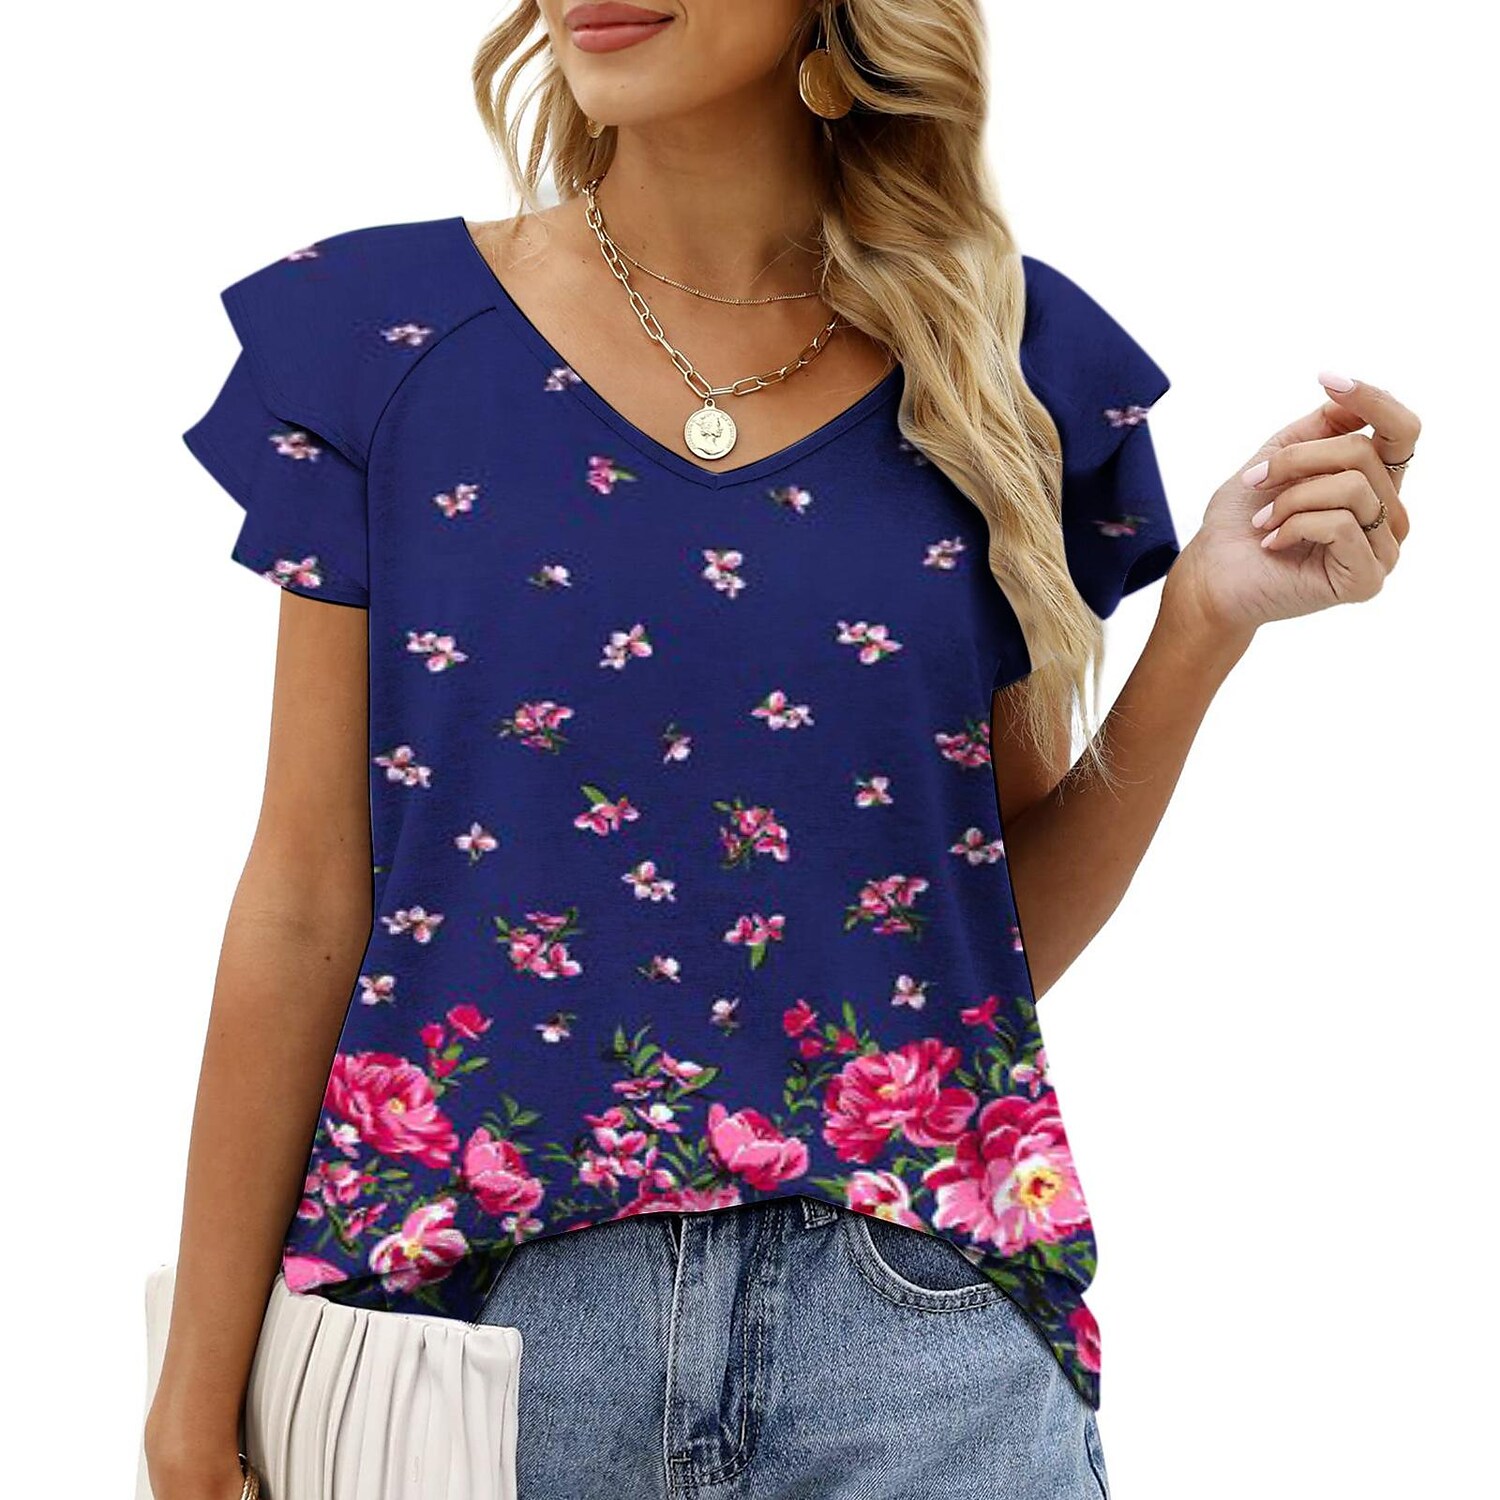 Women's printing v-neck double layer ruffle sleeve loose top t-shirt